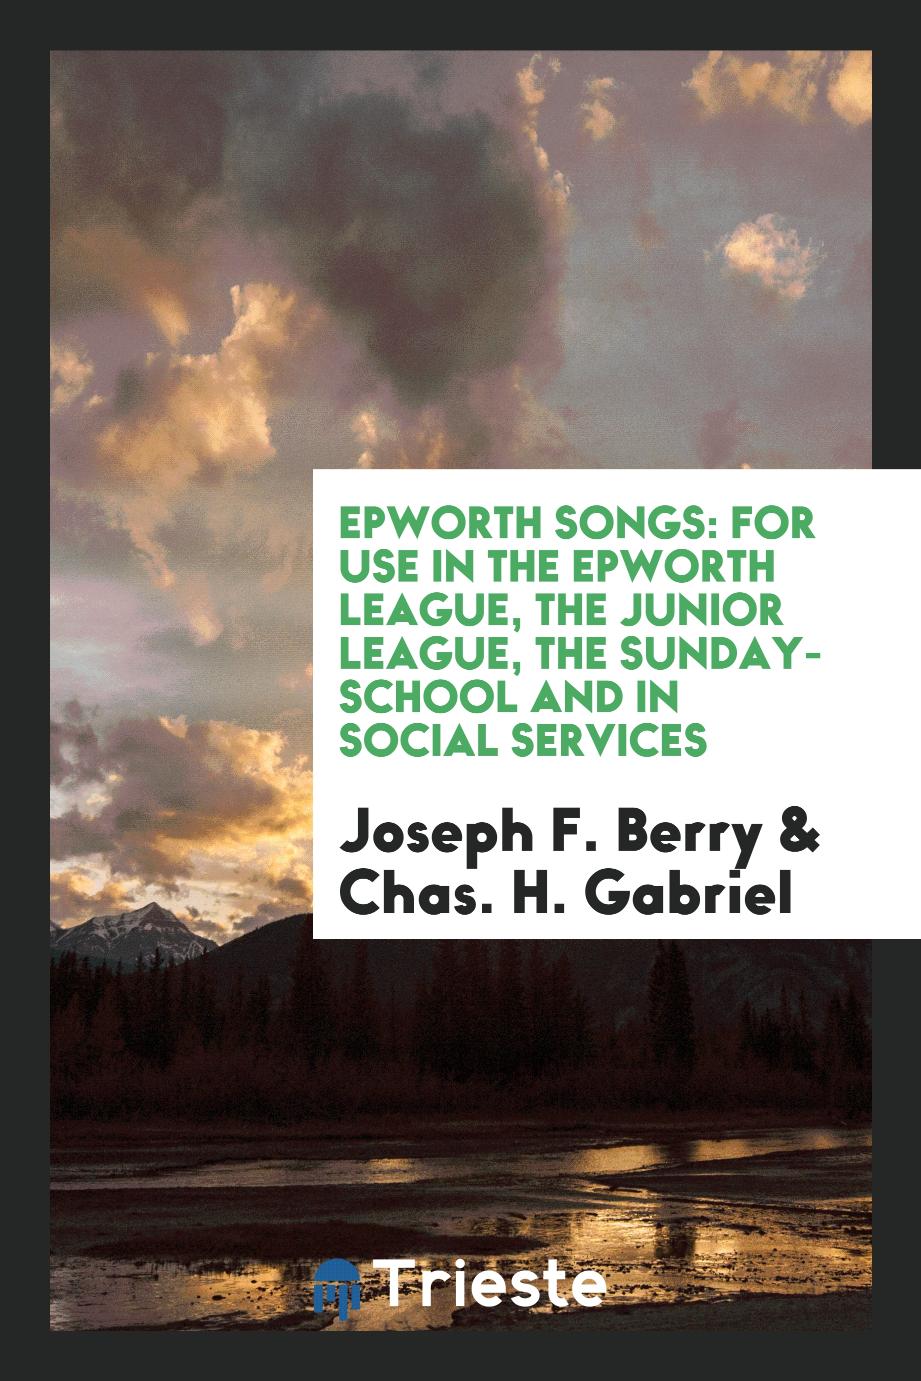 Epworth Songs: For Use in the Epworth League, the Junior League, the Sunday-School and in Social Services